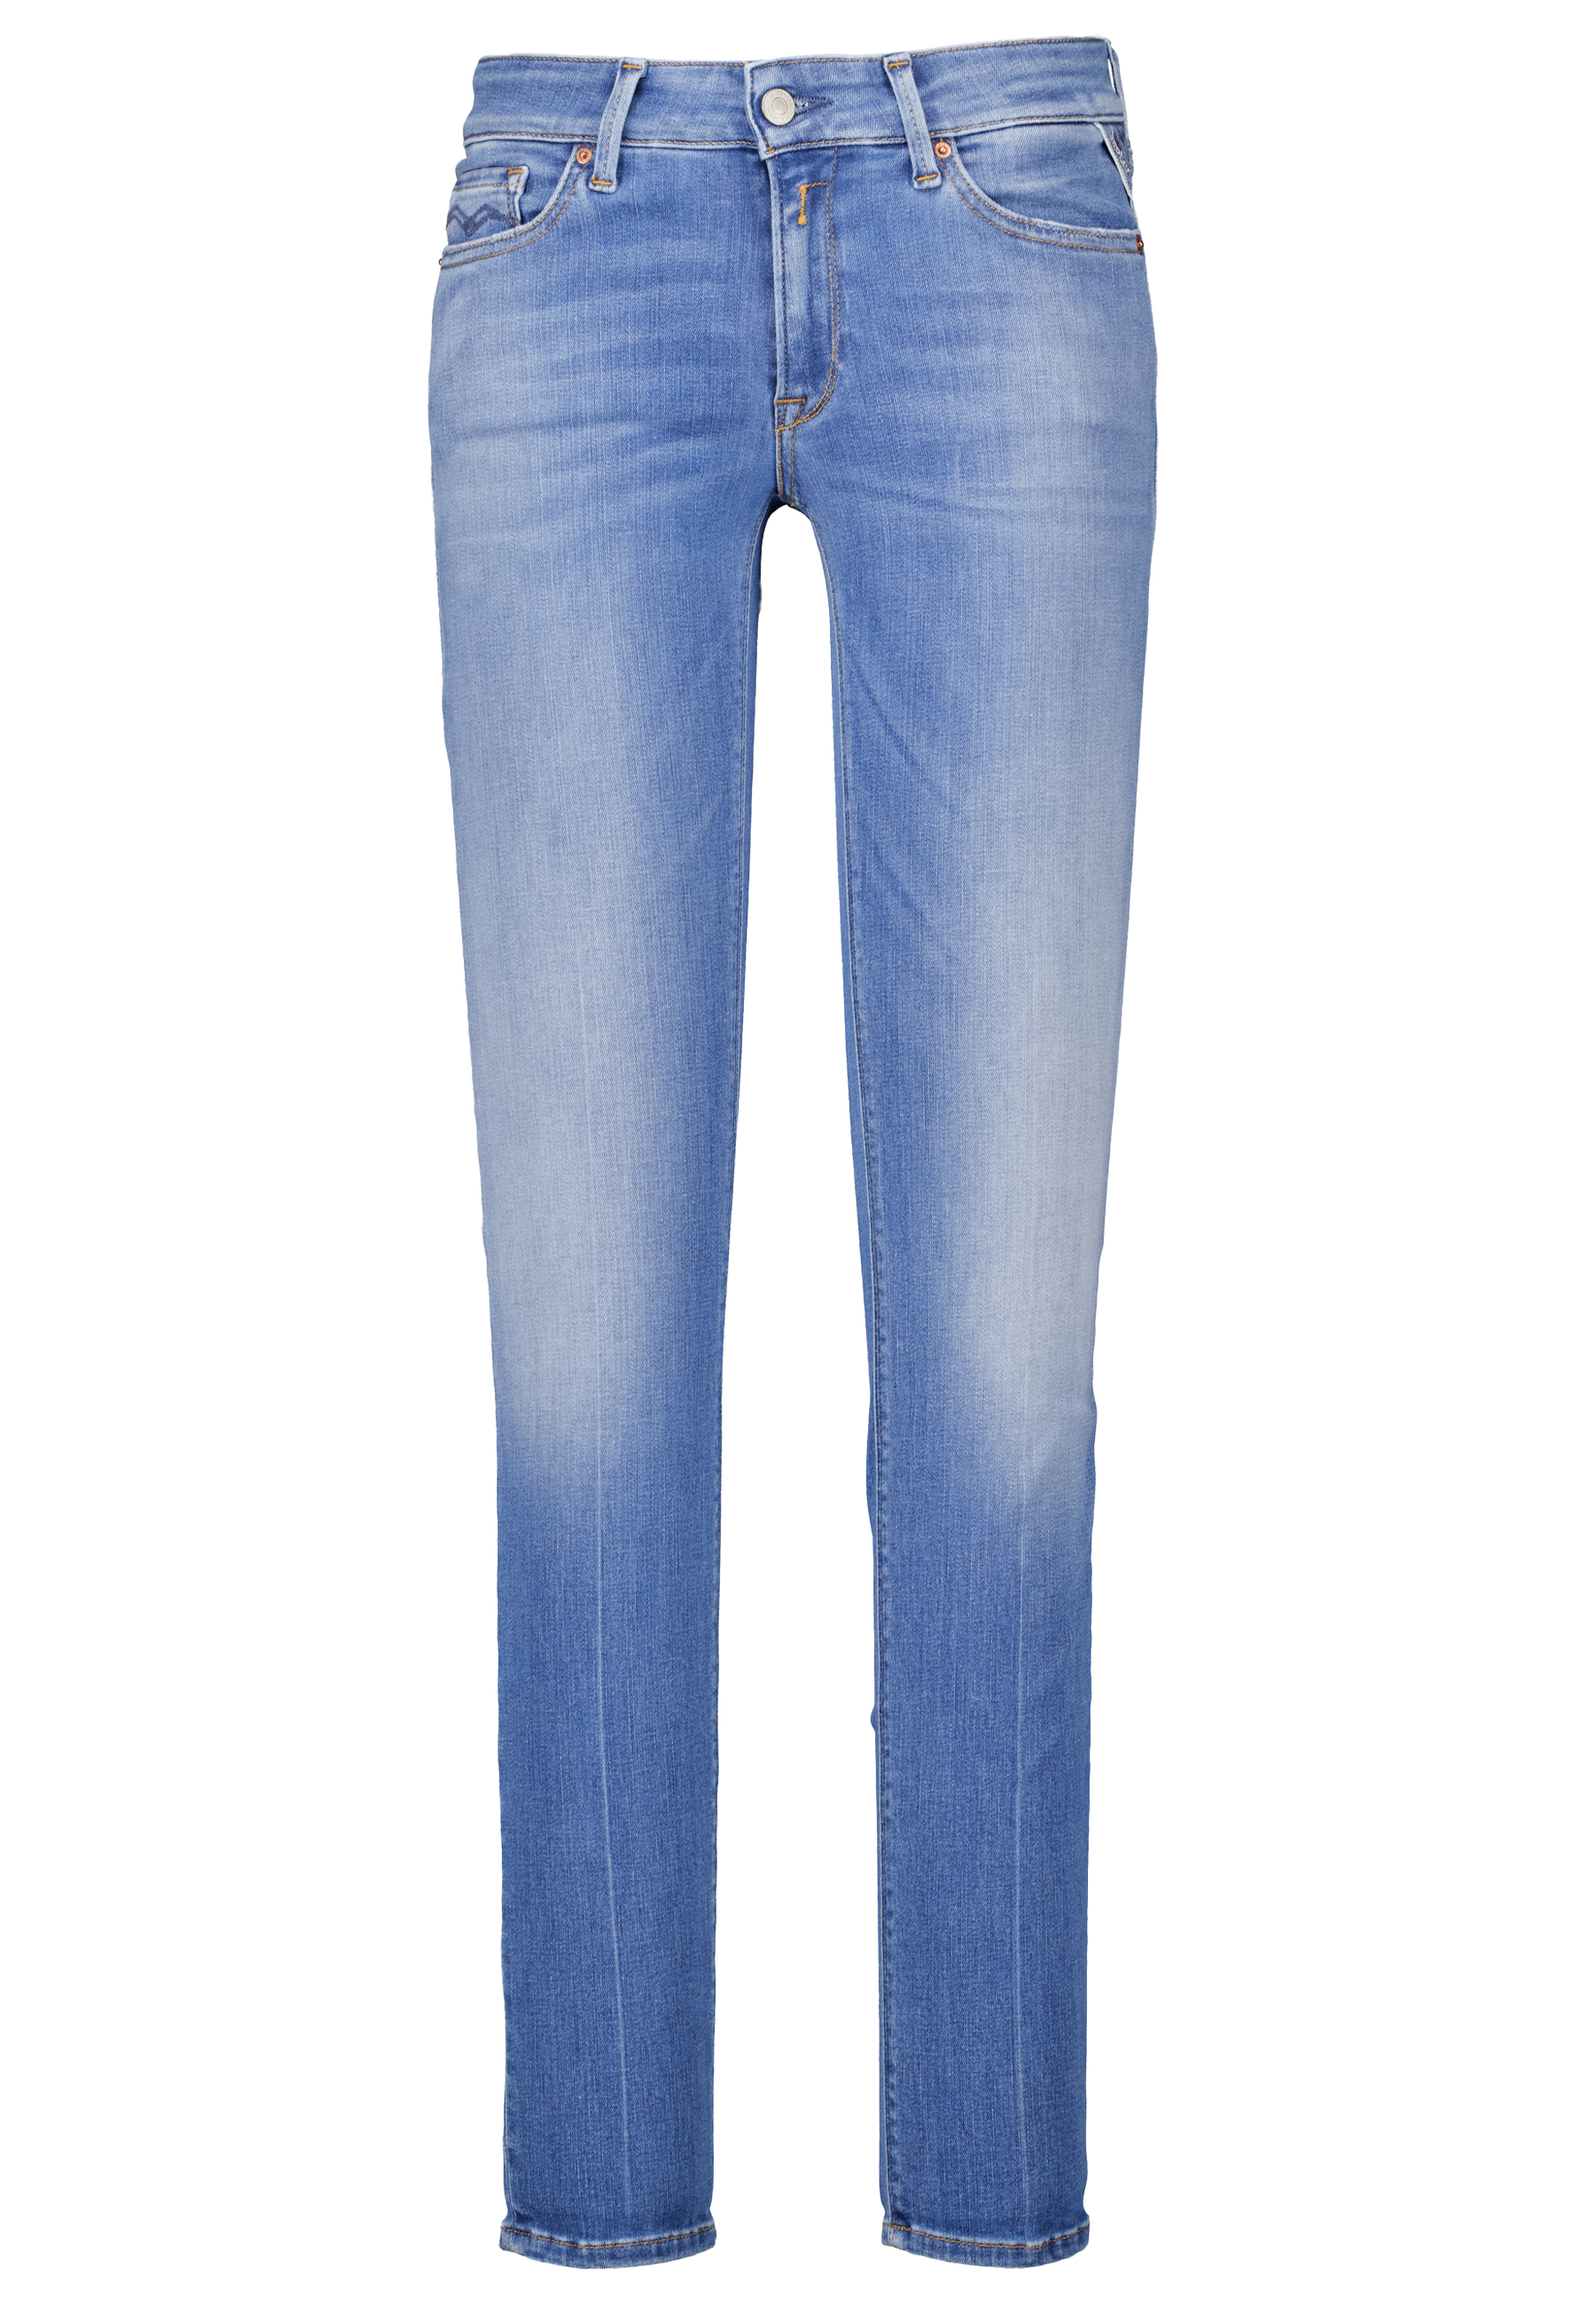 Replay jeans jeans Dames maat 27/32